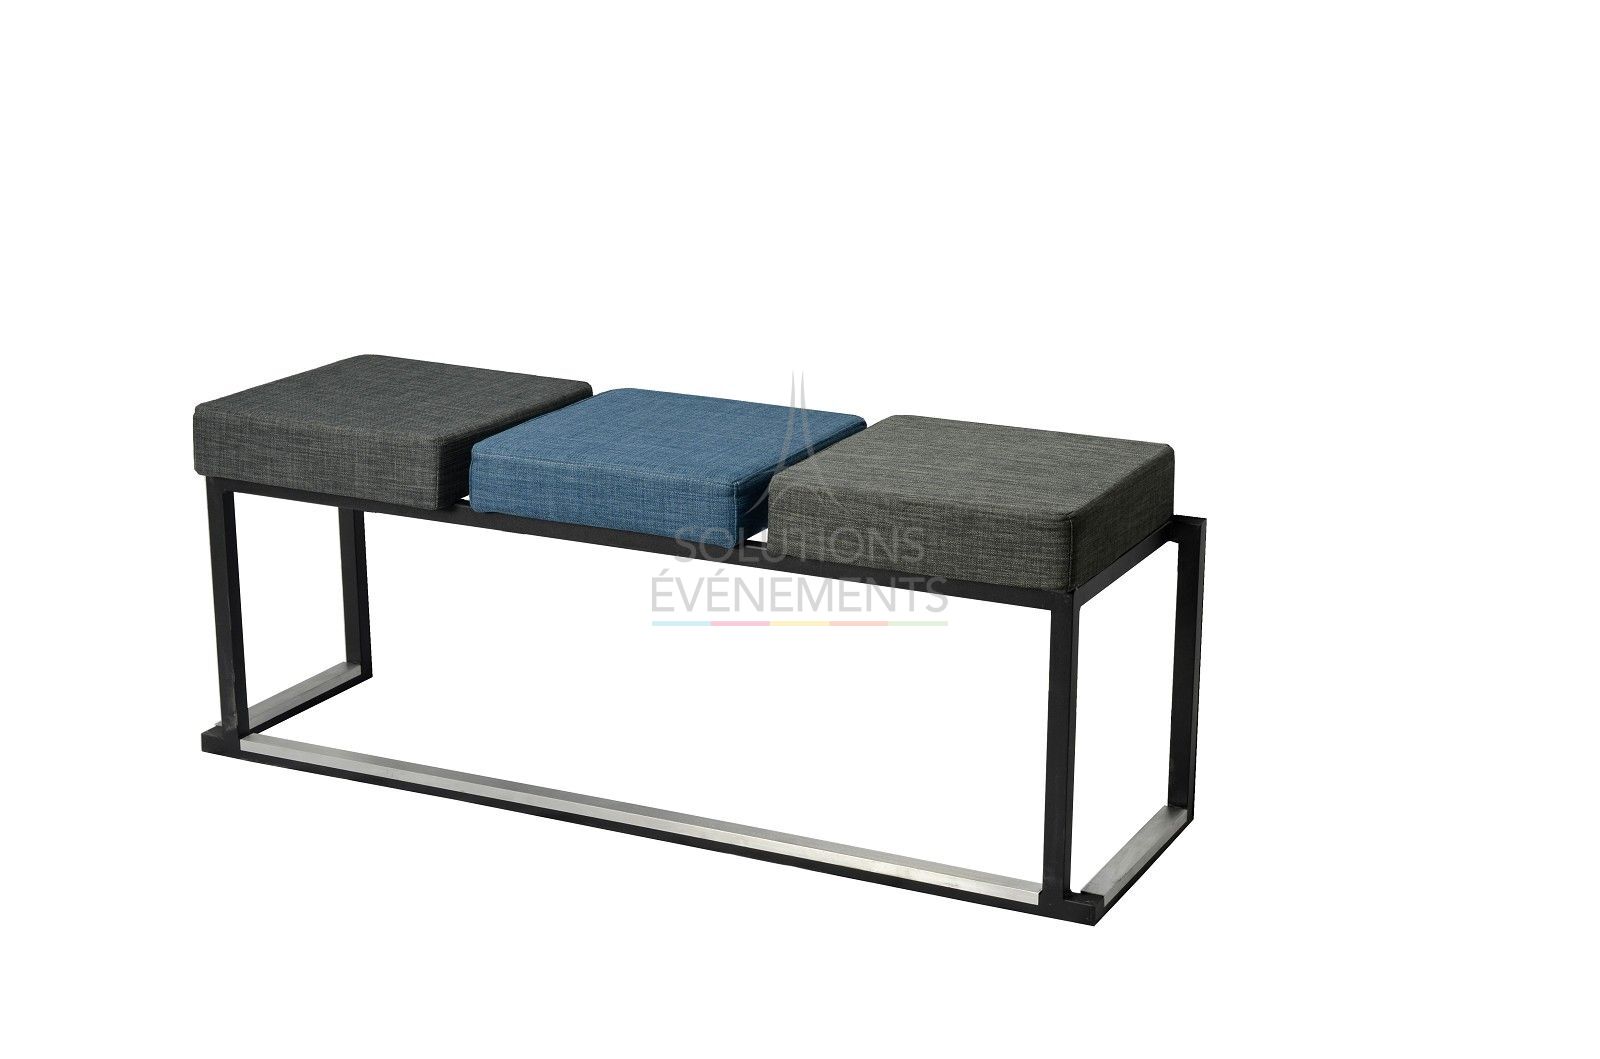 Rental designer bench in gray and blue fabric